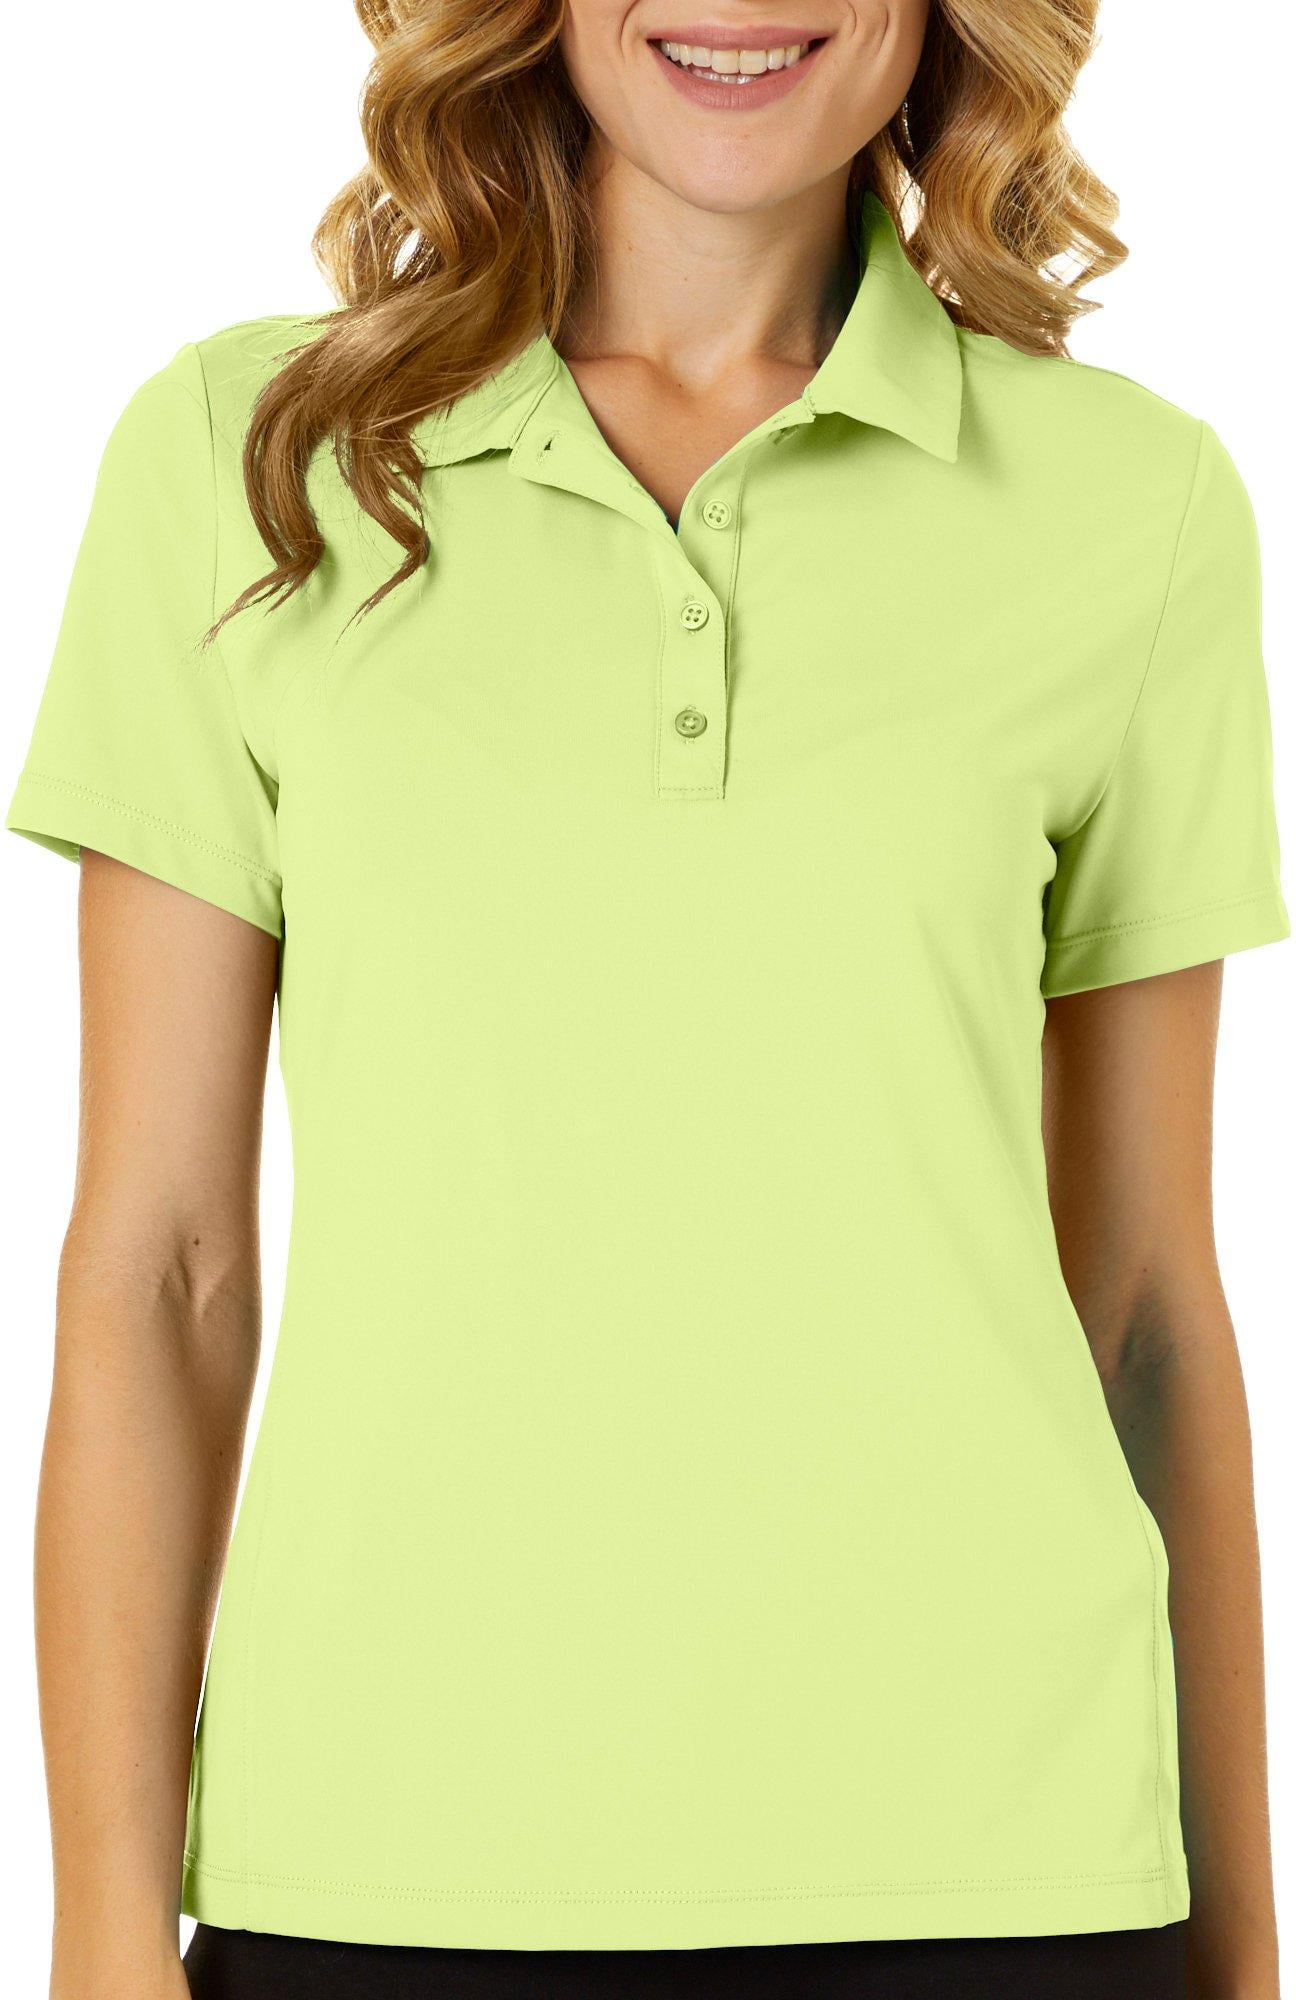 Lillie Green Plus Solid Short Sleeve Polo Shirt 3X Sunny Yellow 